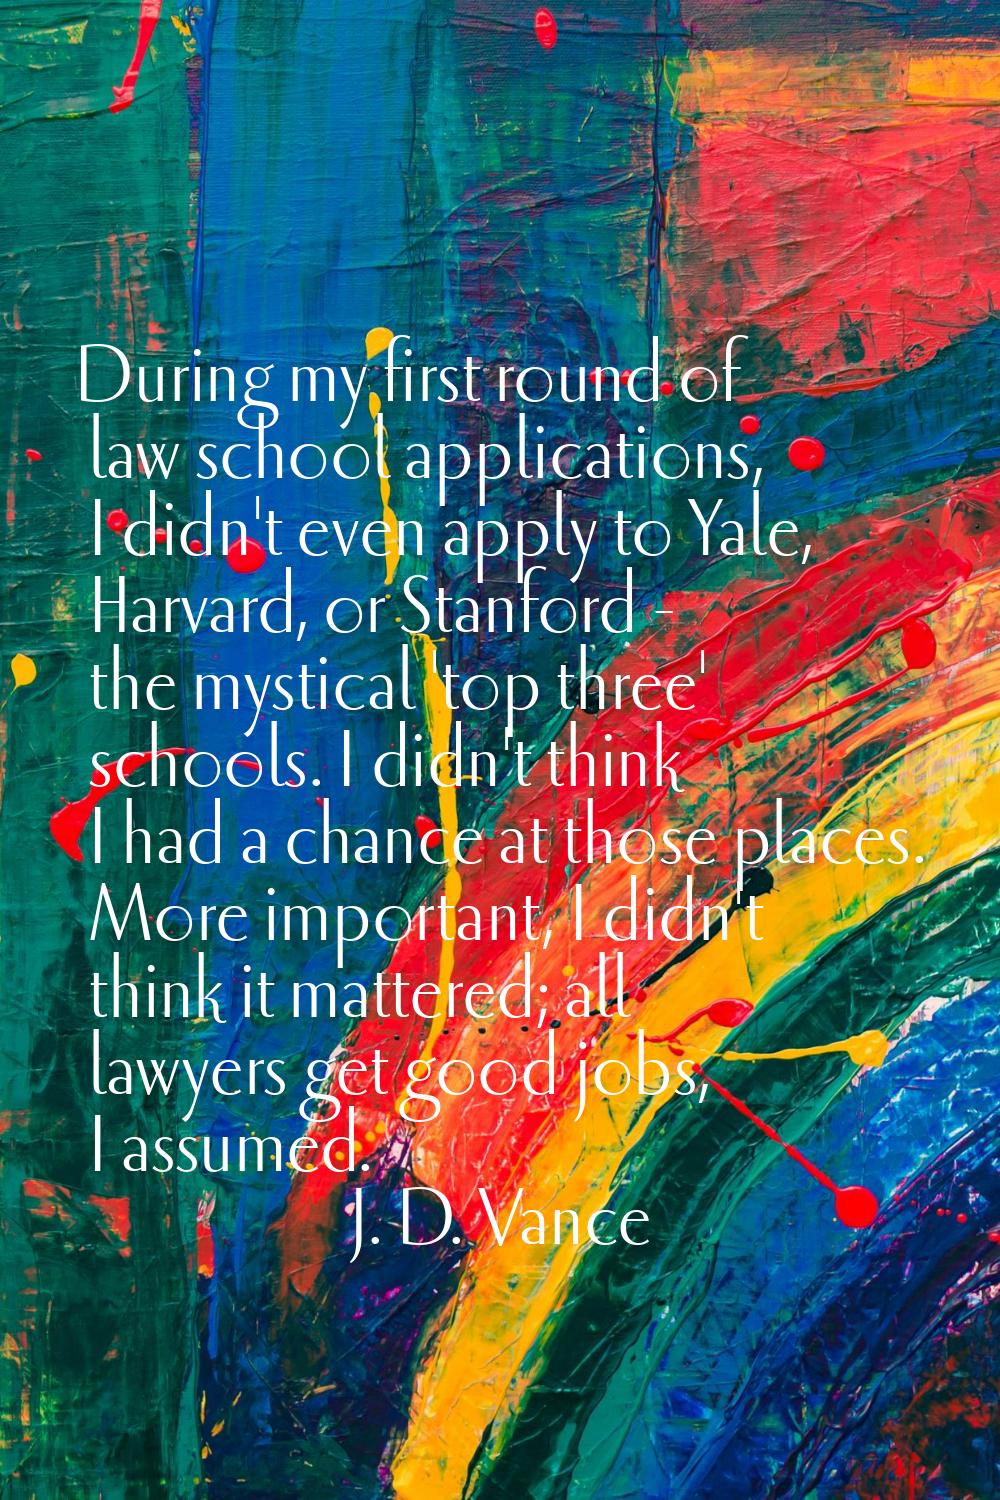 During my first round of law school applications, I didn't even apply to Yale, Harvard, or Stanford